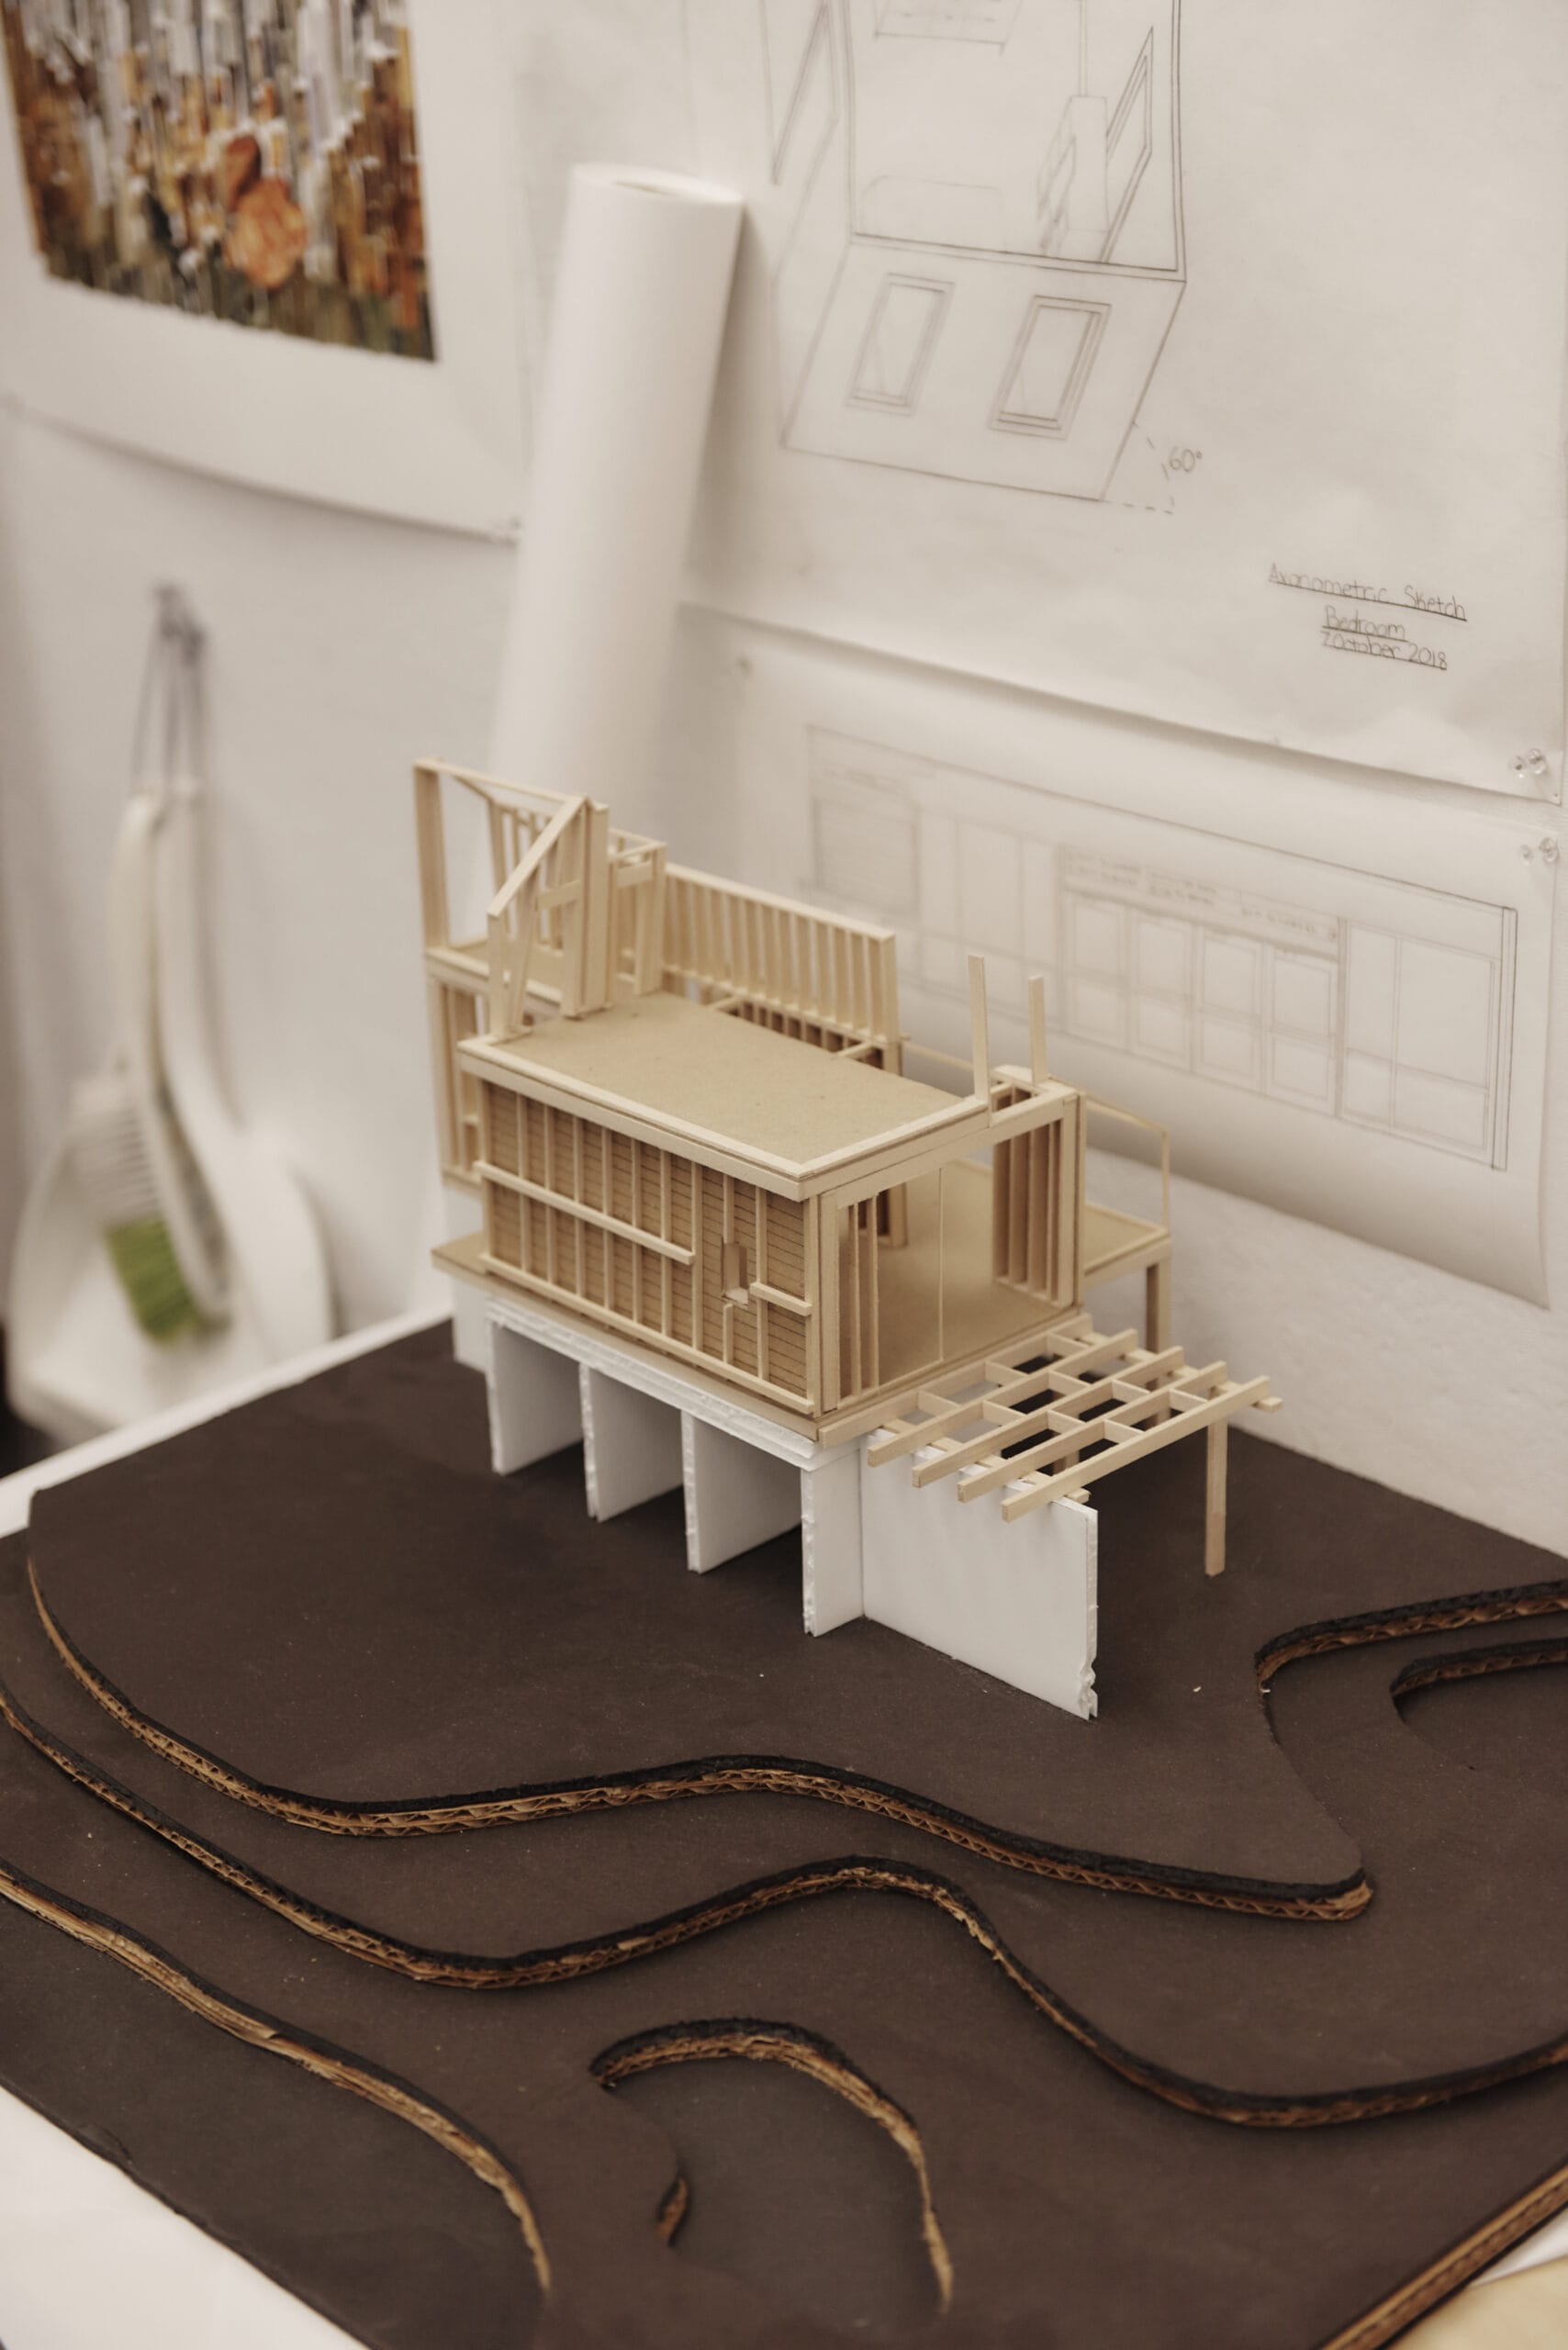 Architectural Model made of balsa wood